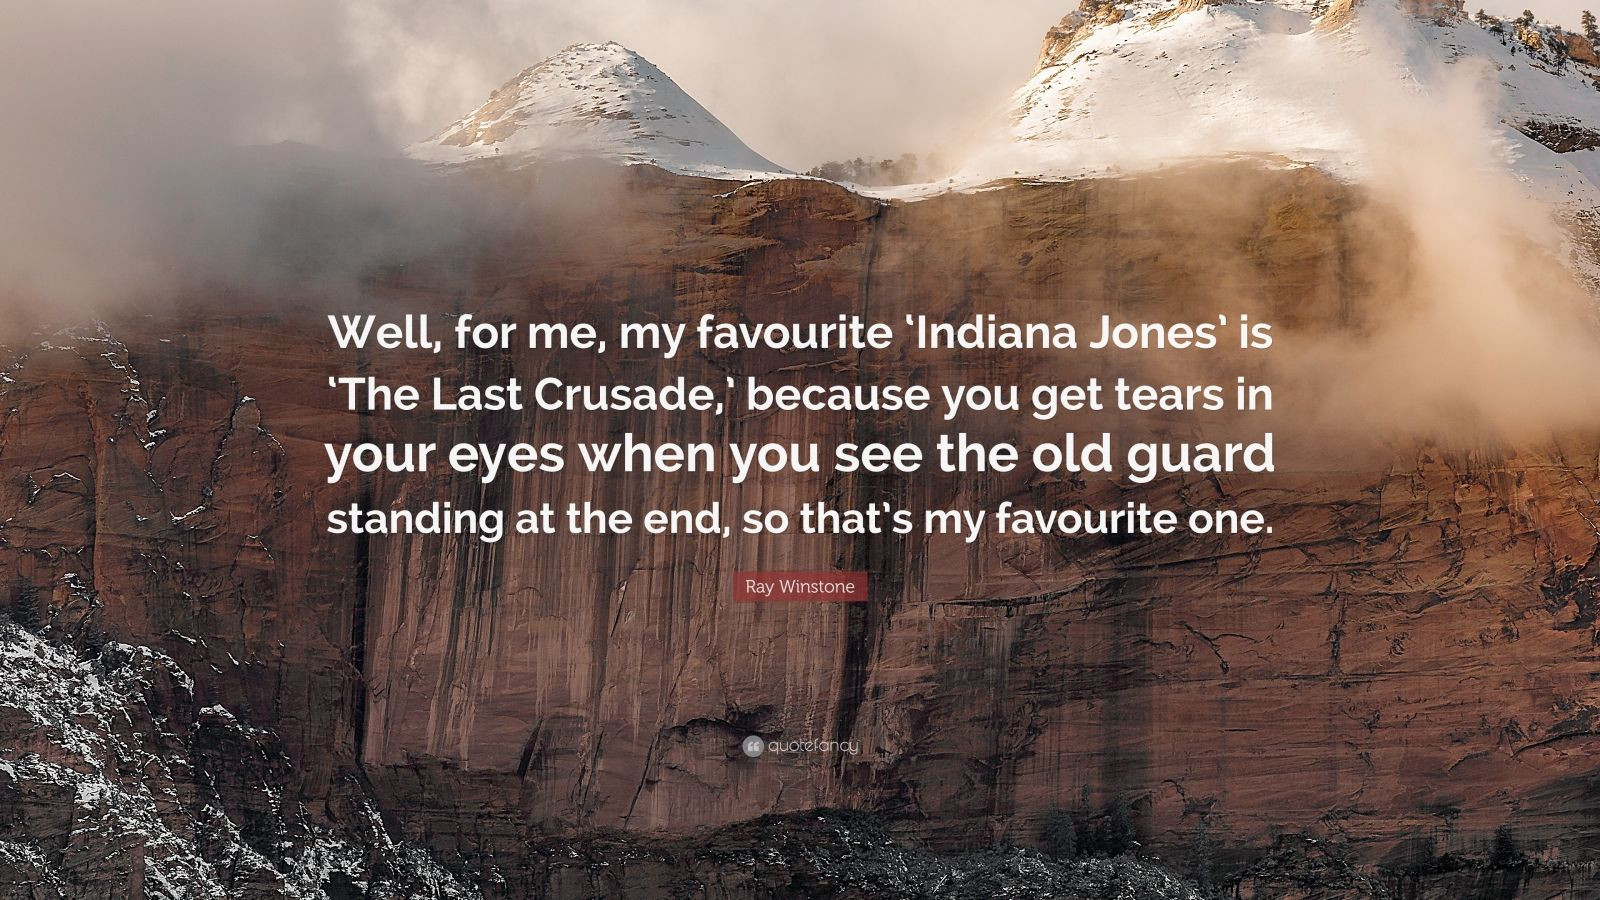 Indiana Jones And The Last Crusade Quotes
 Ray Winstone Quote “Well for me my favourite ‘Indiana